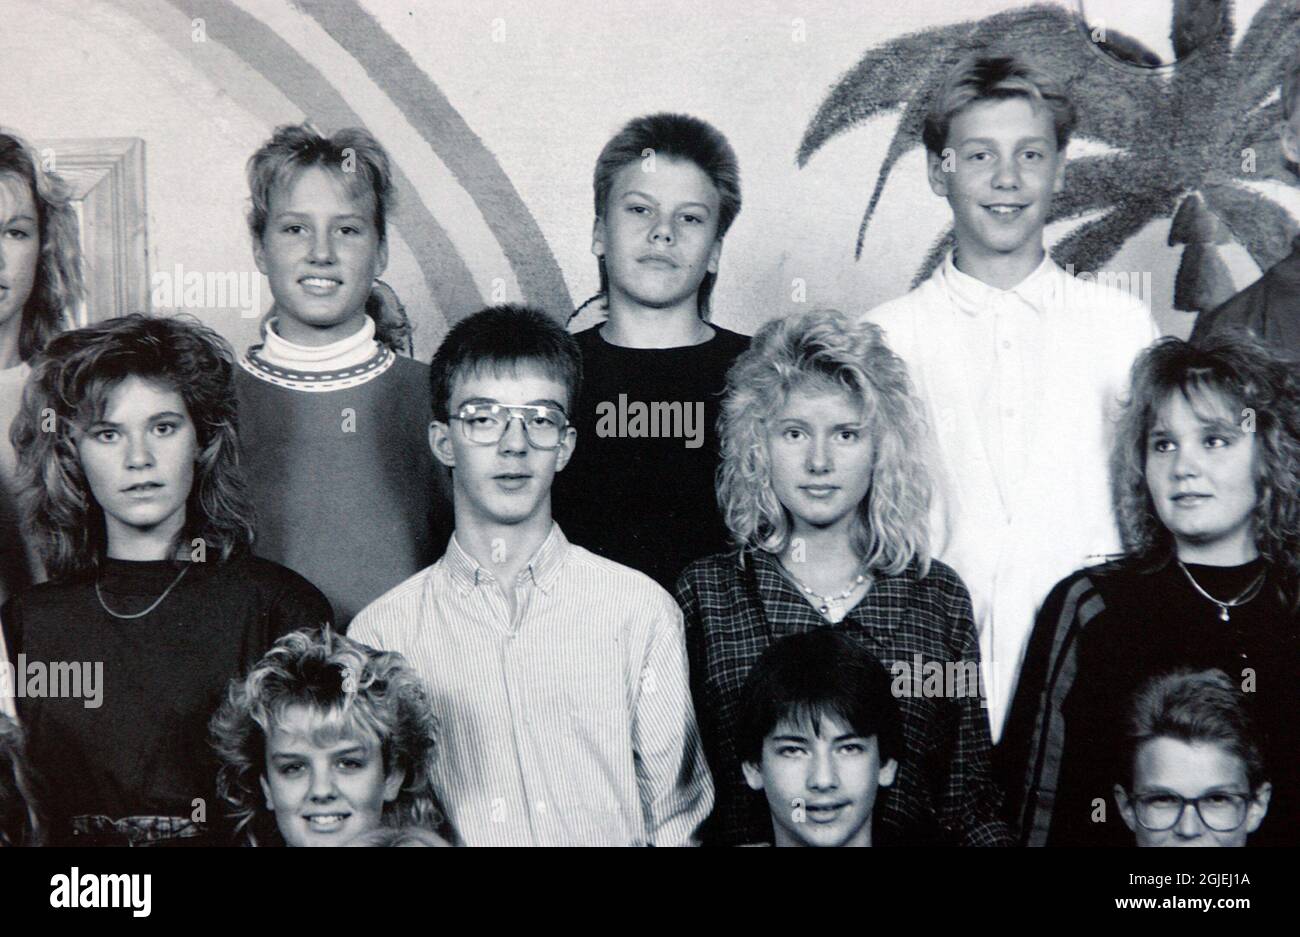 Daniel Westling (back row in the middle), newly engaged to Crown Princess Victoria, pictured with his school class in grade 9 (15 years old) Stock Photo